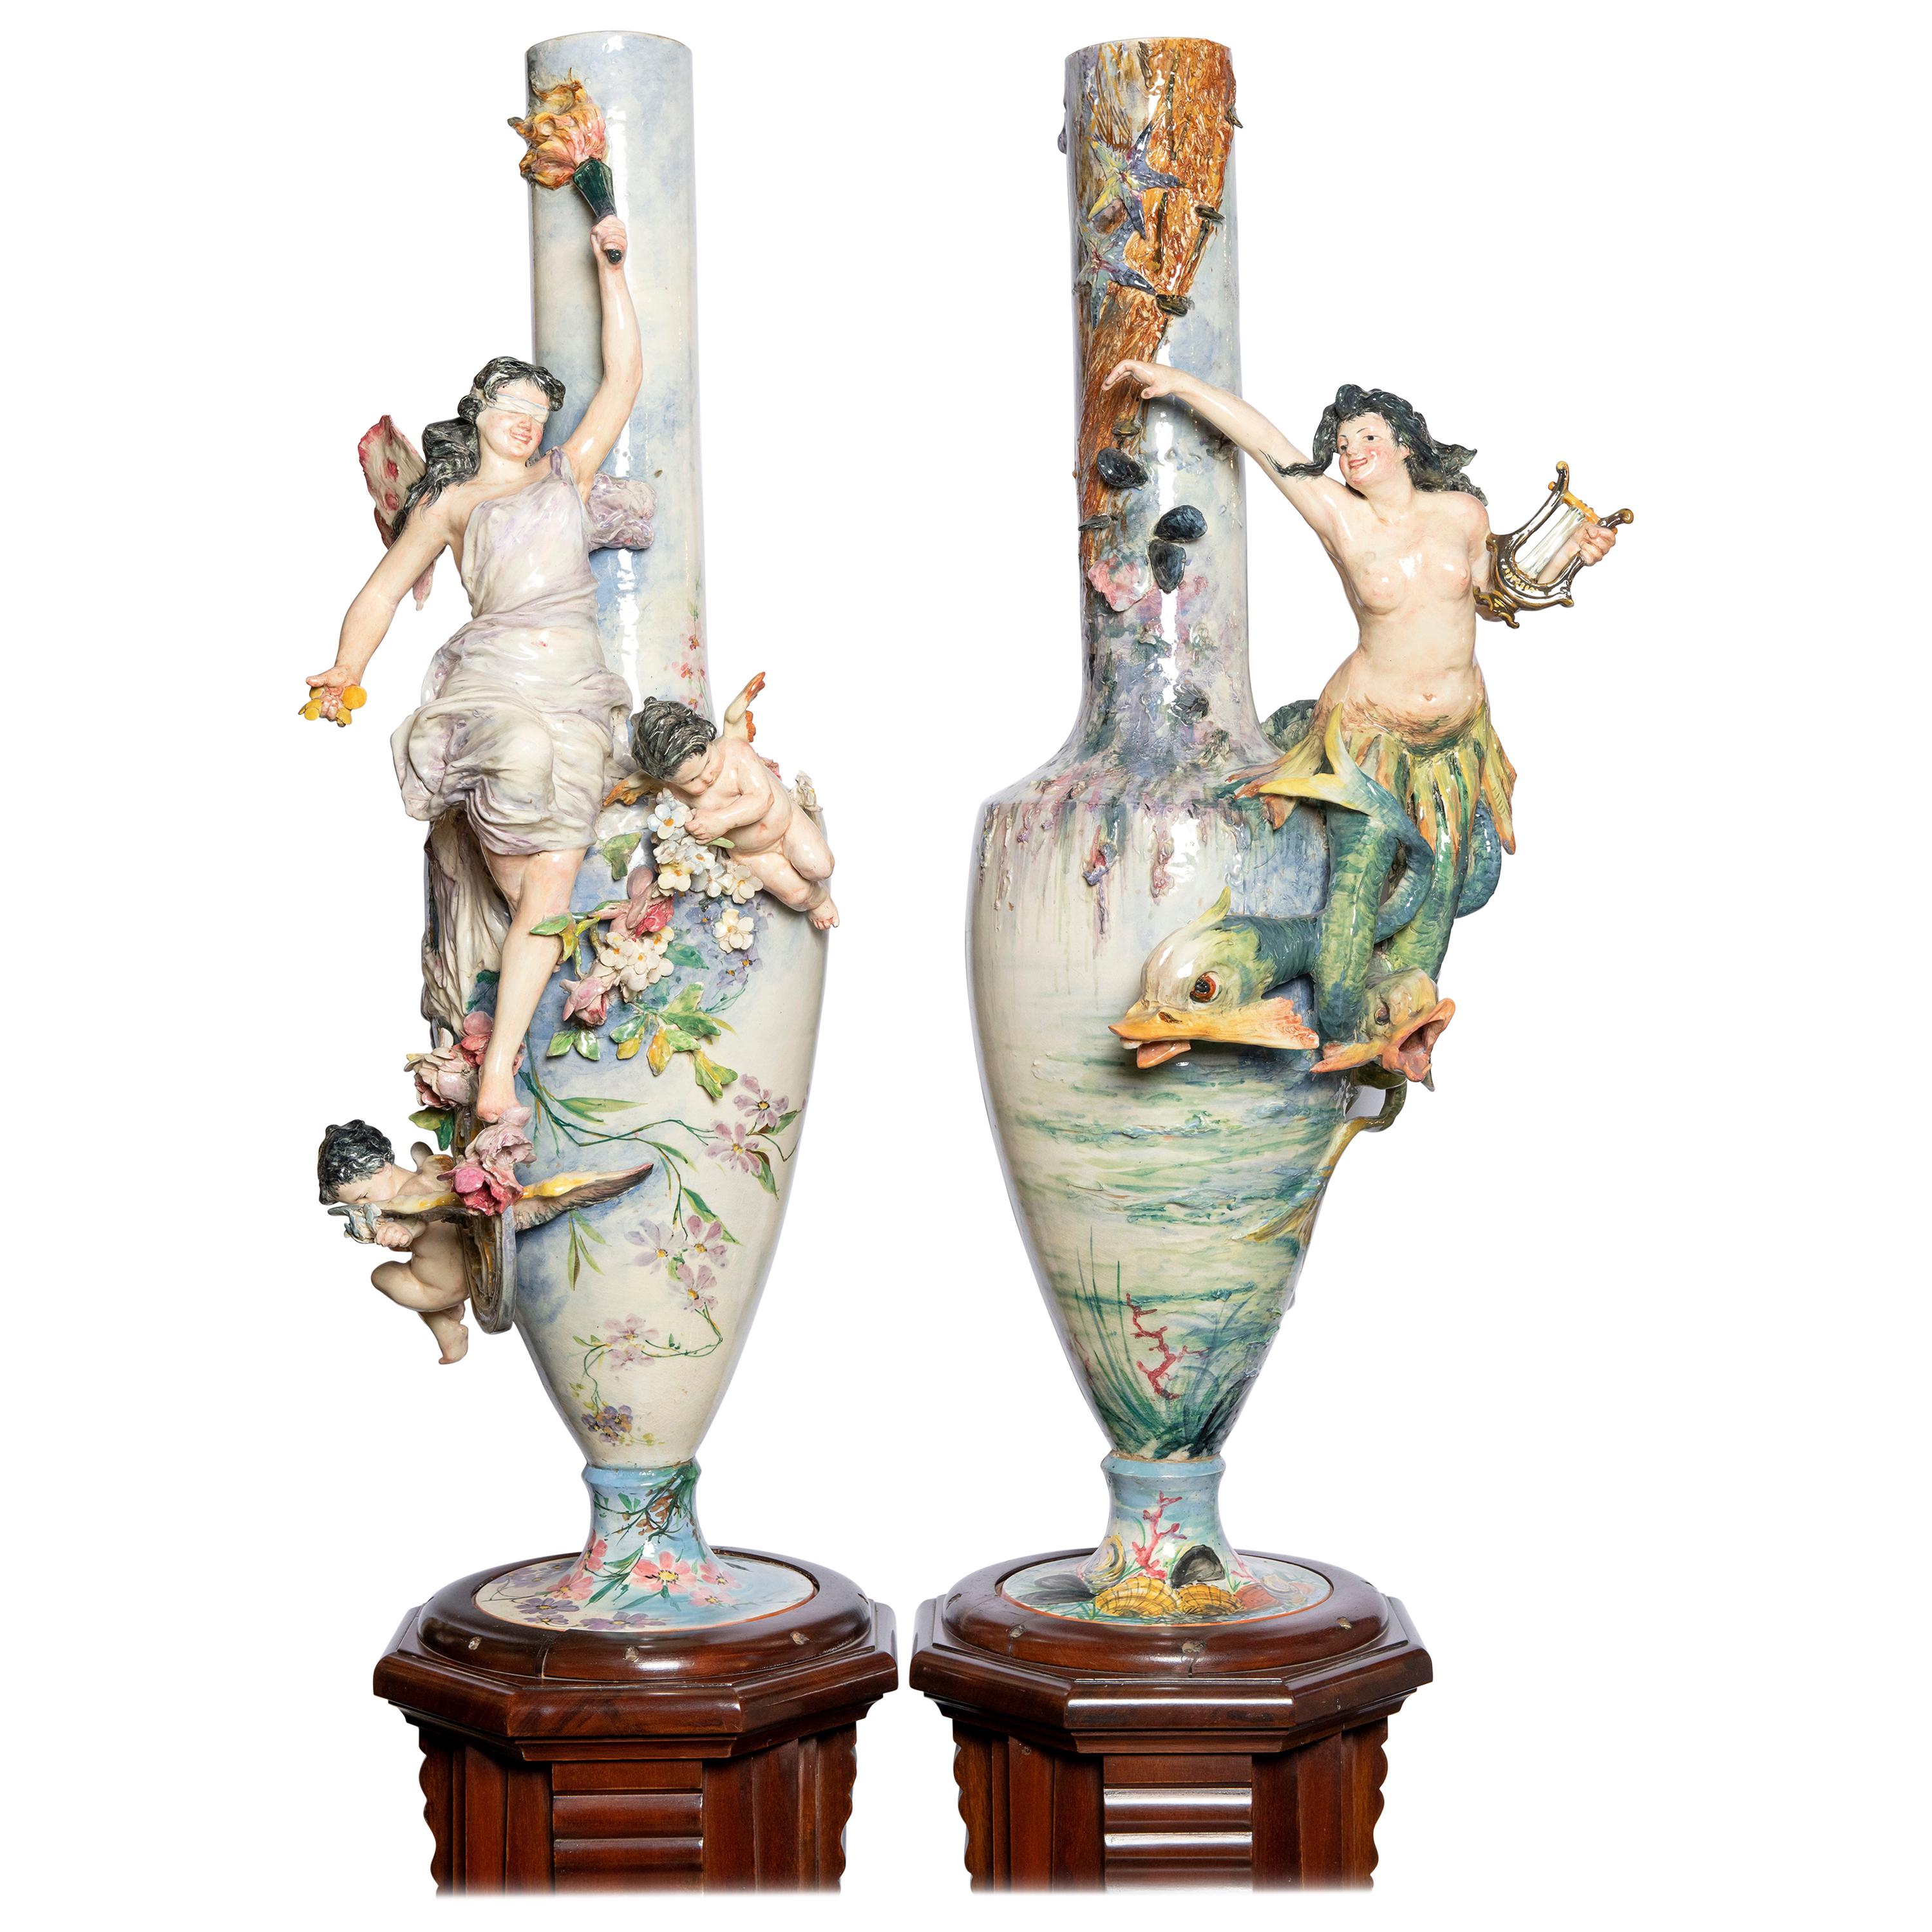 Pair of Glazed Ceramic Vases with Wood Base, France, Late 19th Century